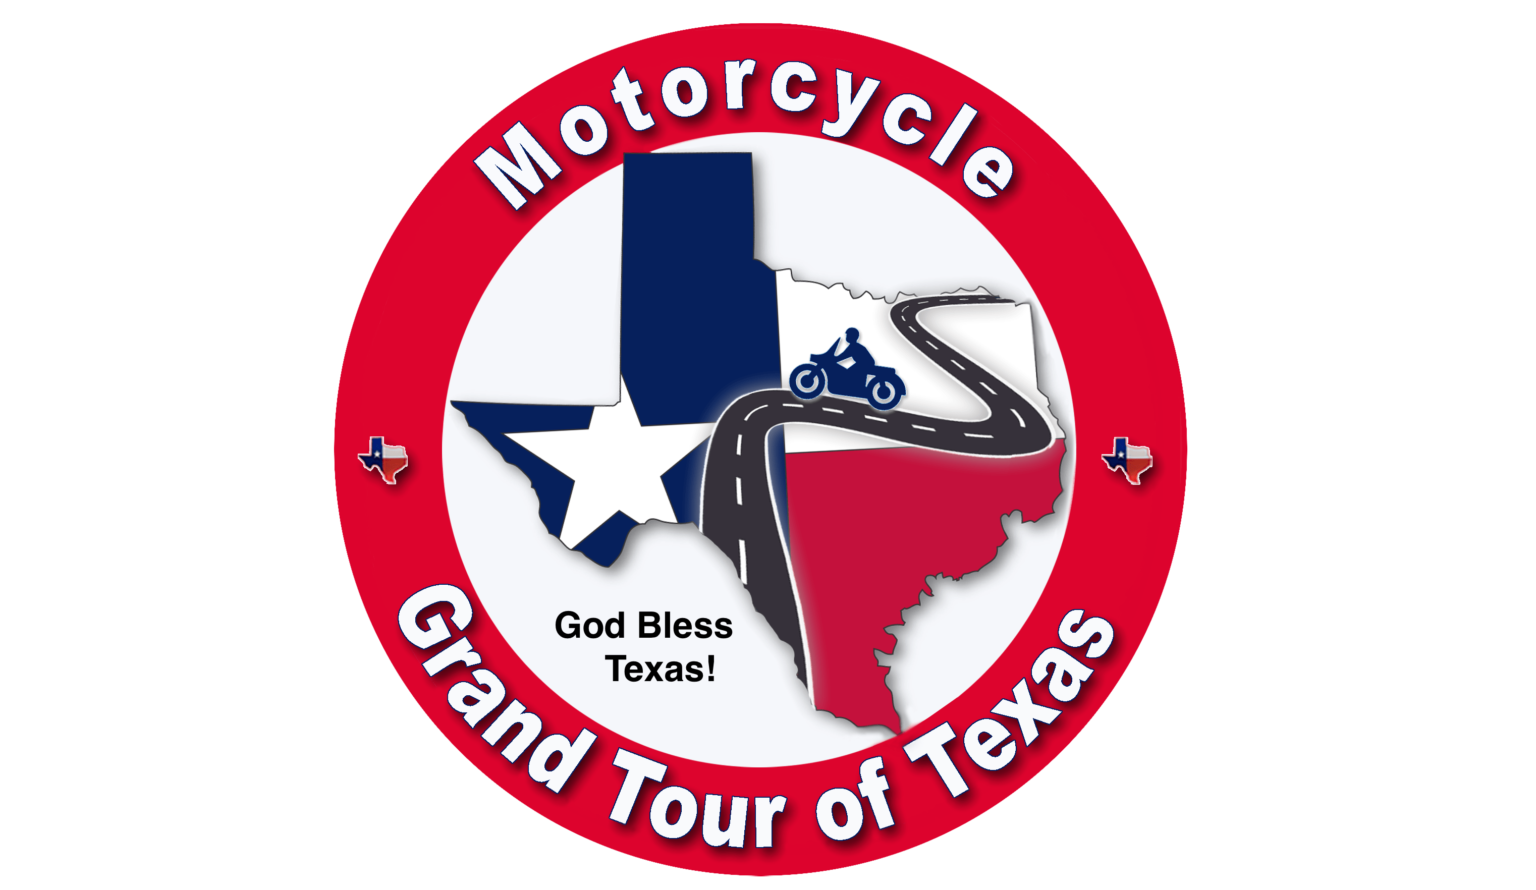 Motorcycle Grand Tour of Texas Texas Sidecars for motorcycles and